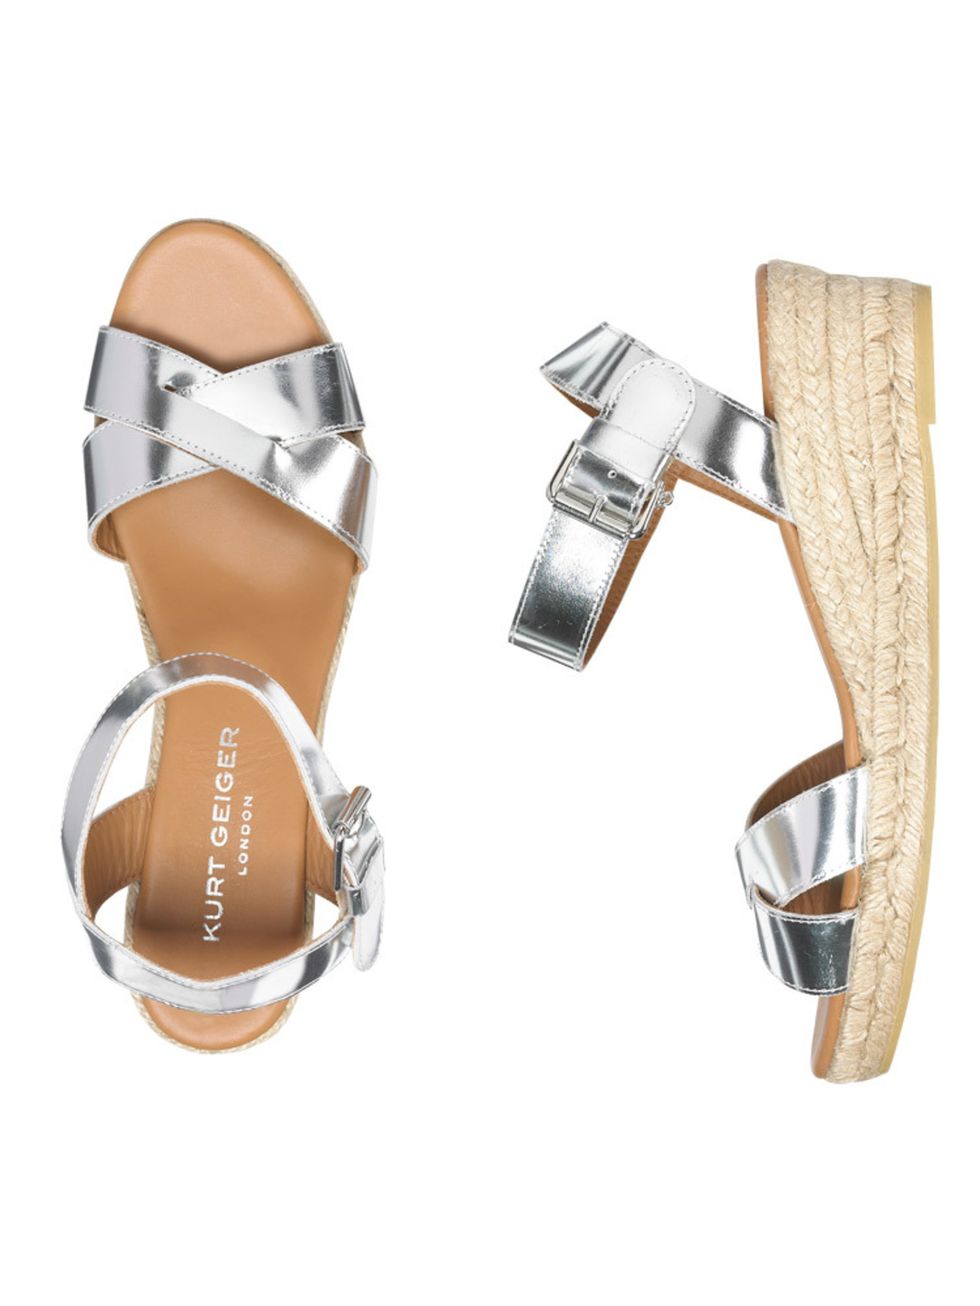 "I like a bit of sparkle in small doses. The metallic sheen of these shoes complement the look rather than overshadow it."

Leather-mix sandals, £130, Kurt Geiger